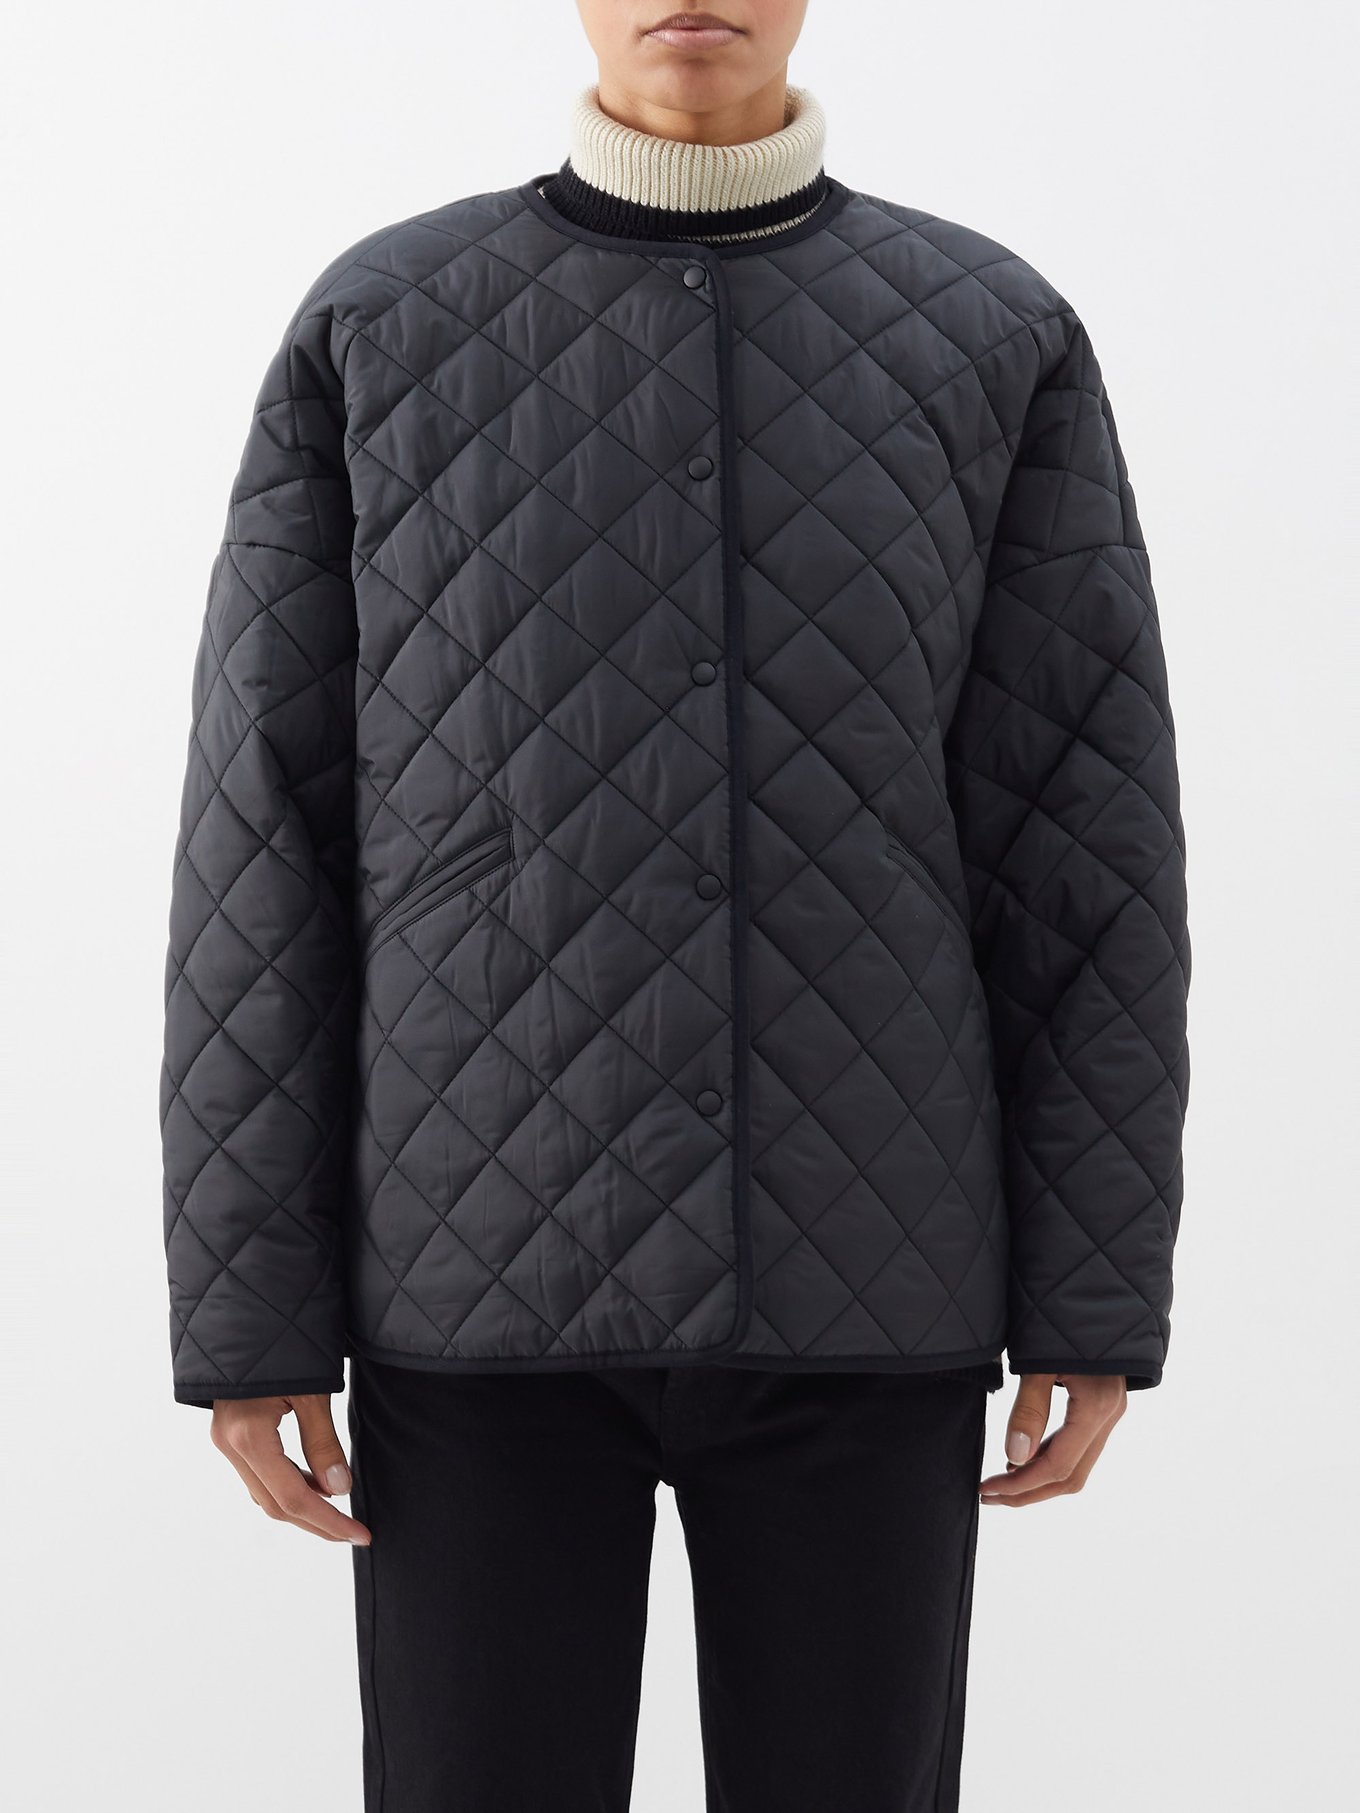 Dublin diamond-quilted soft-shell jacket video